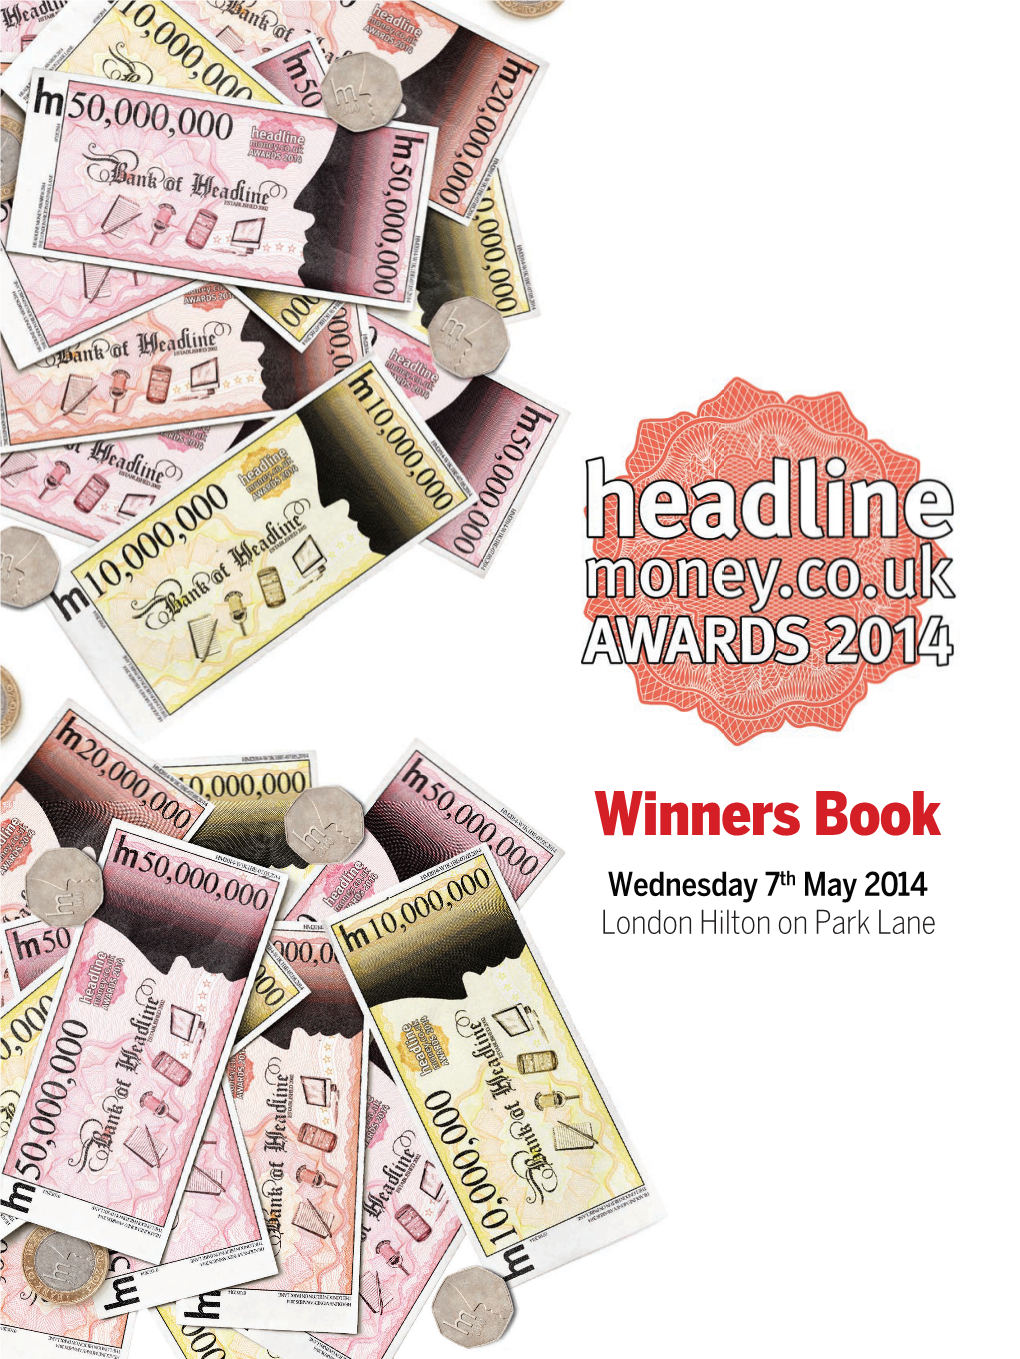 Winners Book Wednesday 7Th May 2014 London Hilton on Park Lane Thank You to Our Sponsors